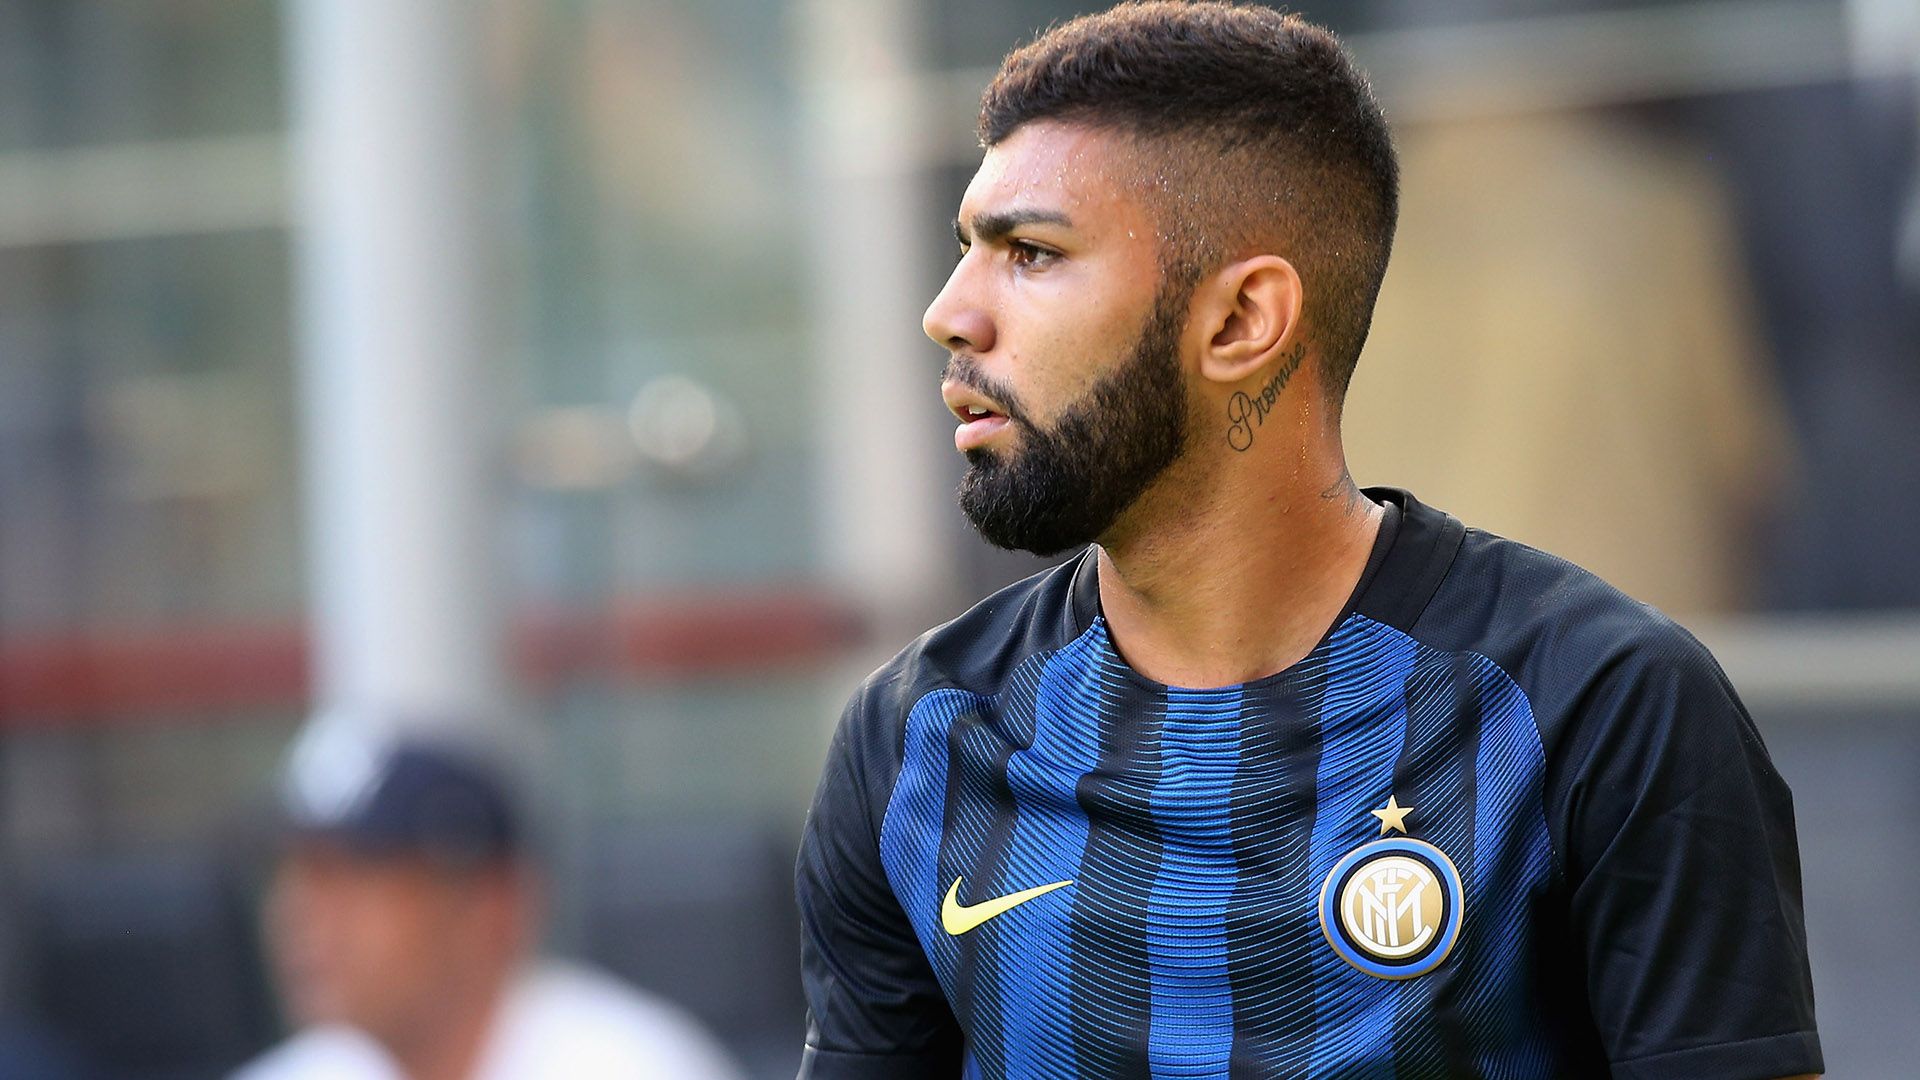 MILAN, ITALY - SEPTEMBER 25:  Gabriel Barbosa of Inter during the Serie A match between FC Internazionale and Bologna FC at Stadio Giuseppe Meazza on September 25, 2016 in Milan, Italy.  (Photo by Maurizio Lagana/Getty Images)